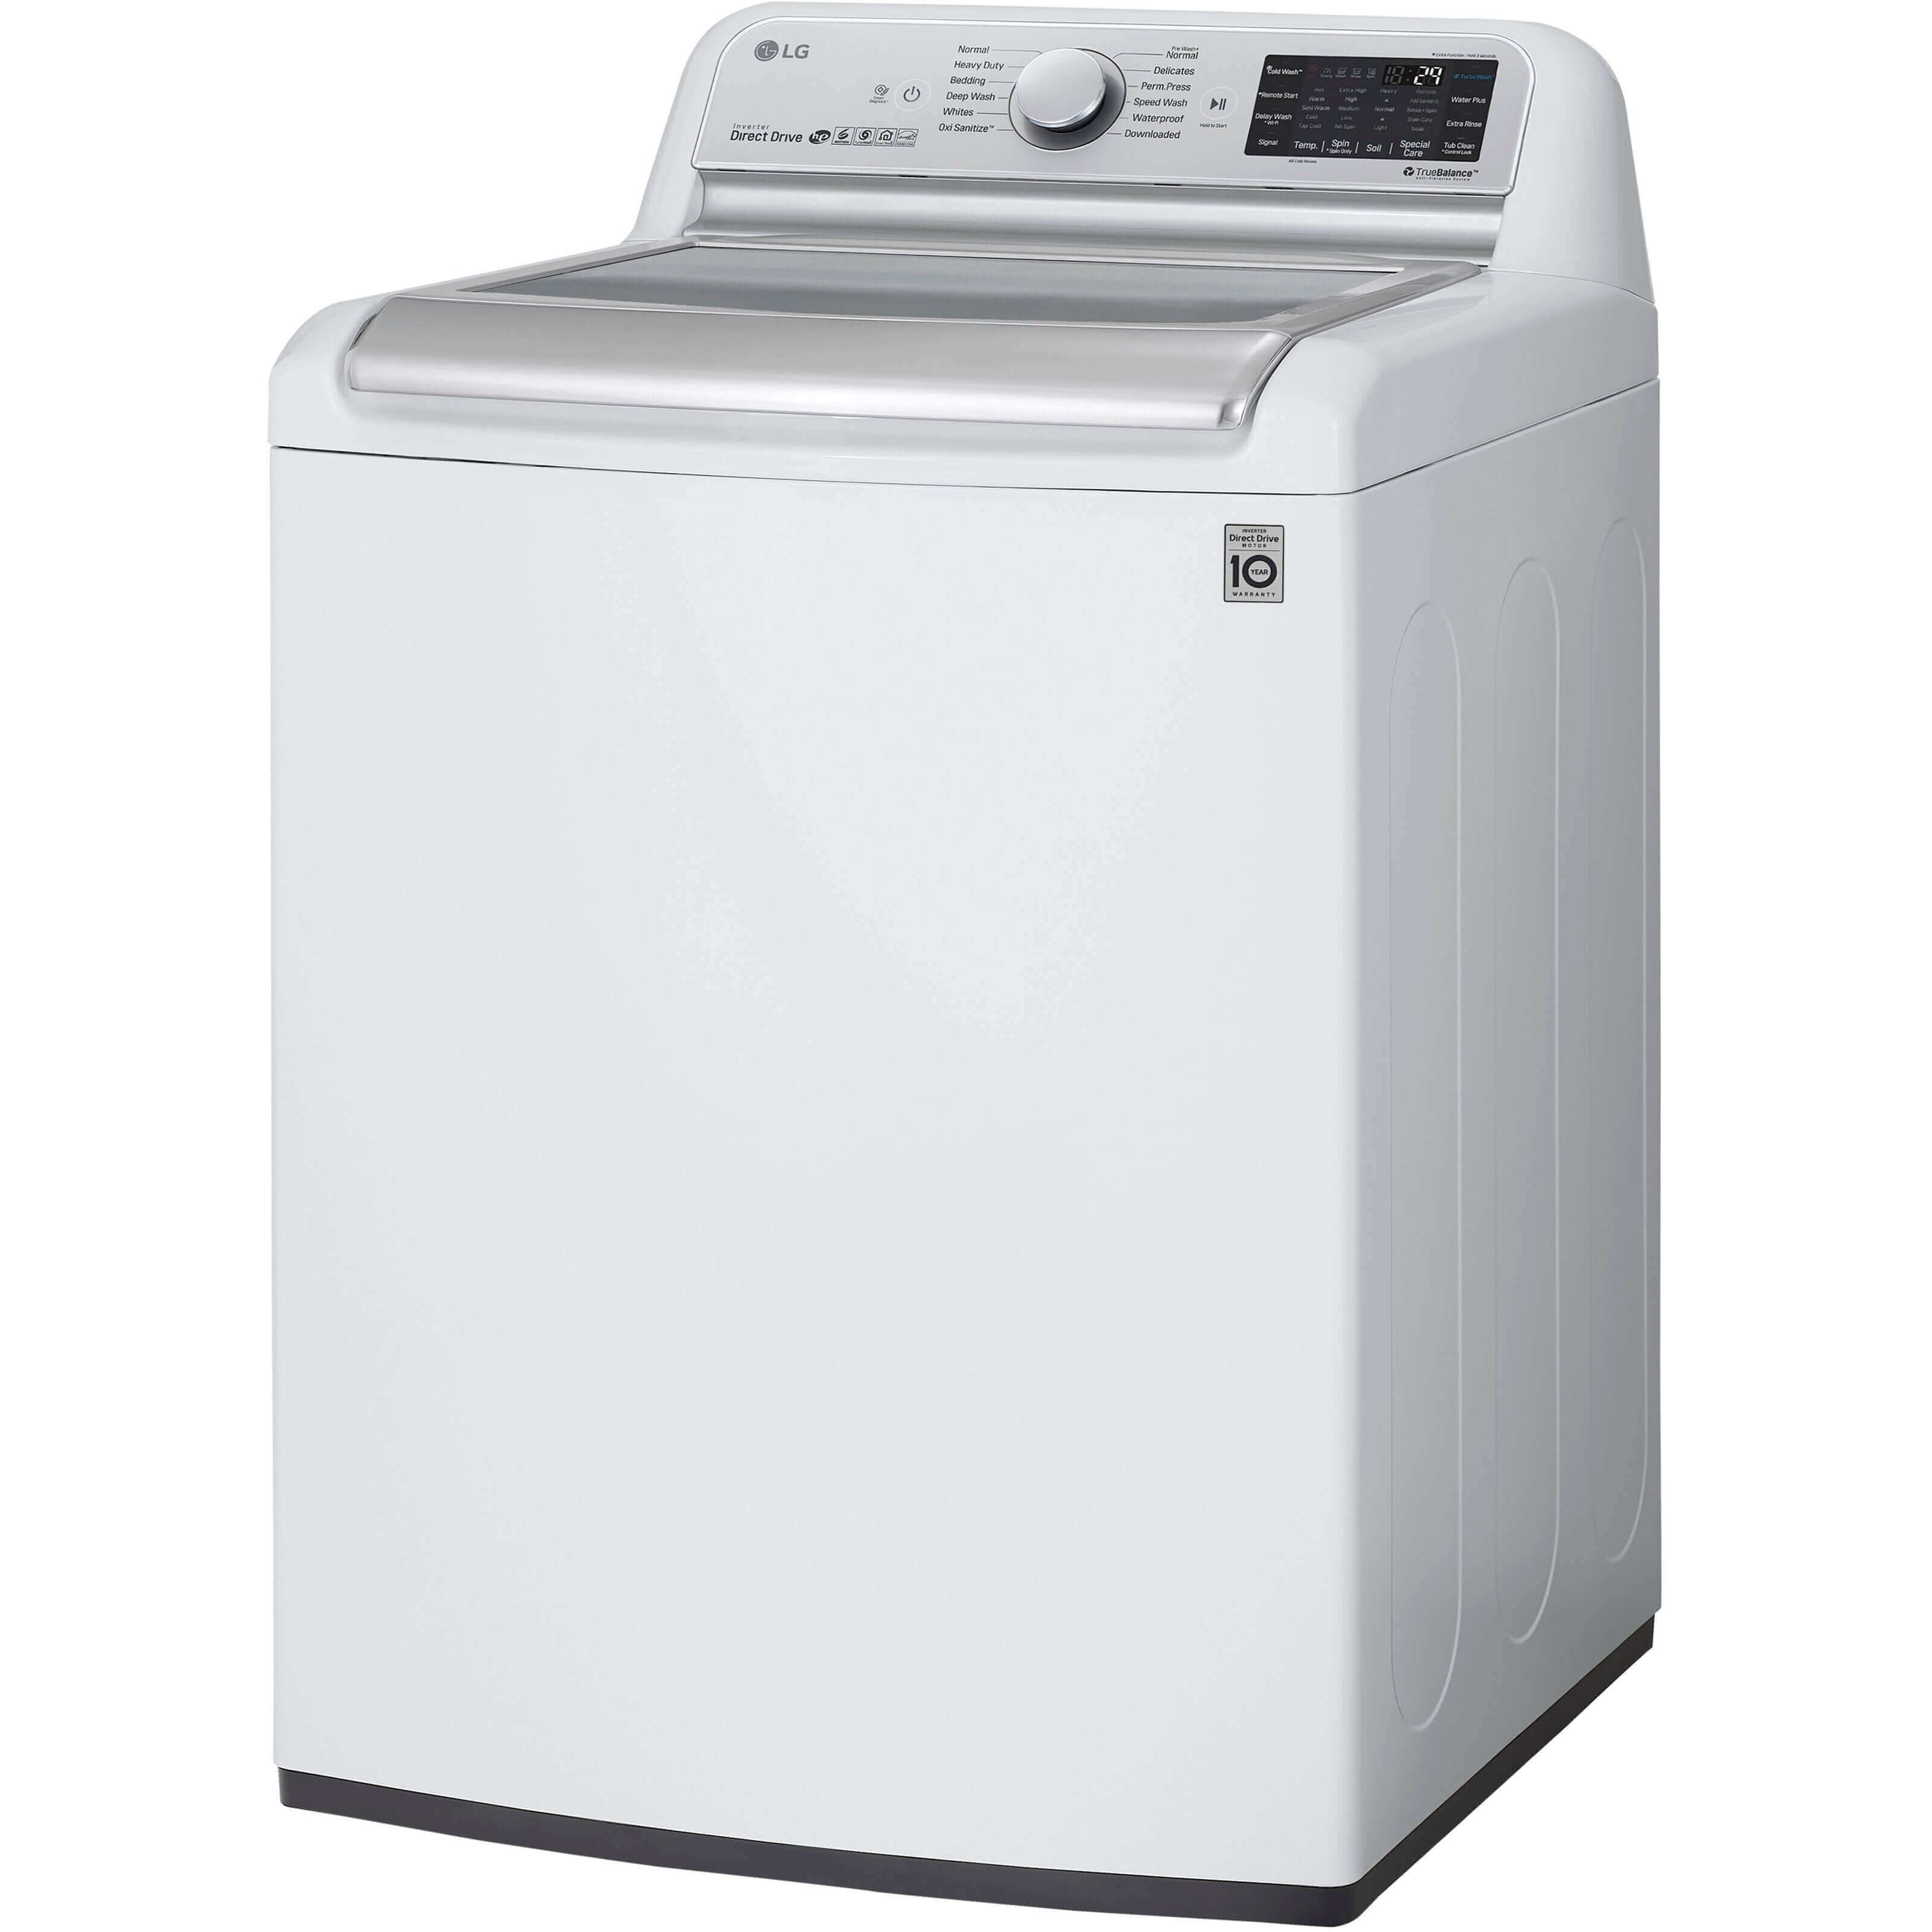 LG 27 Inch Smart wi-fi Enabled Top Load Washer with TurboWash3D Technology in White 5.5 cu. ft. (WT7800CW)